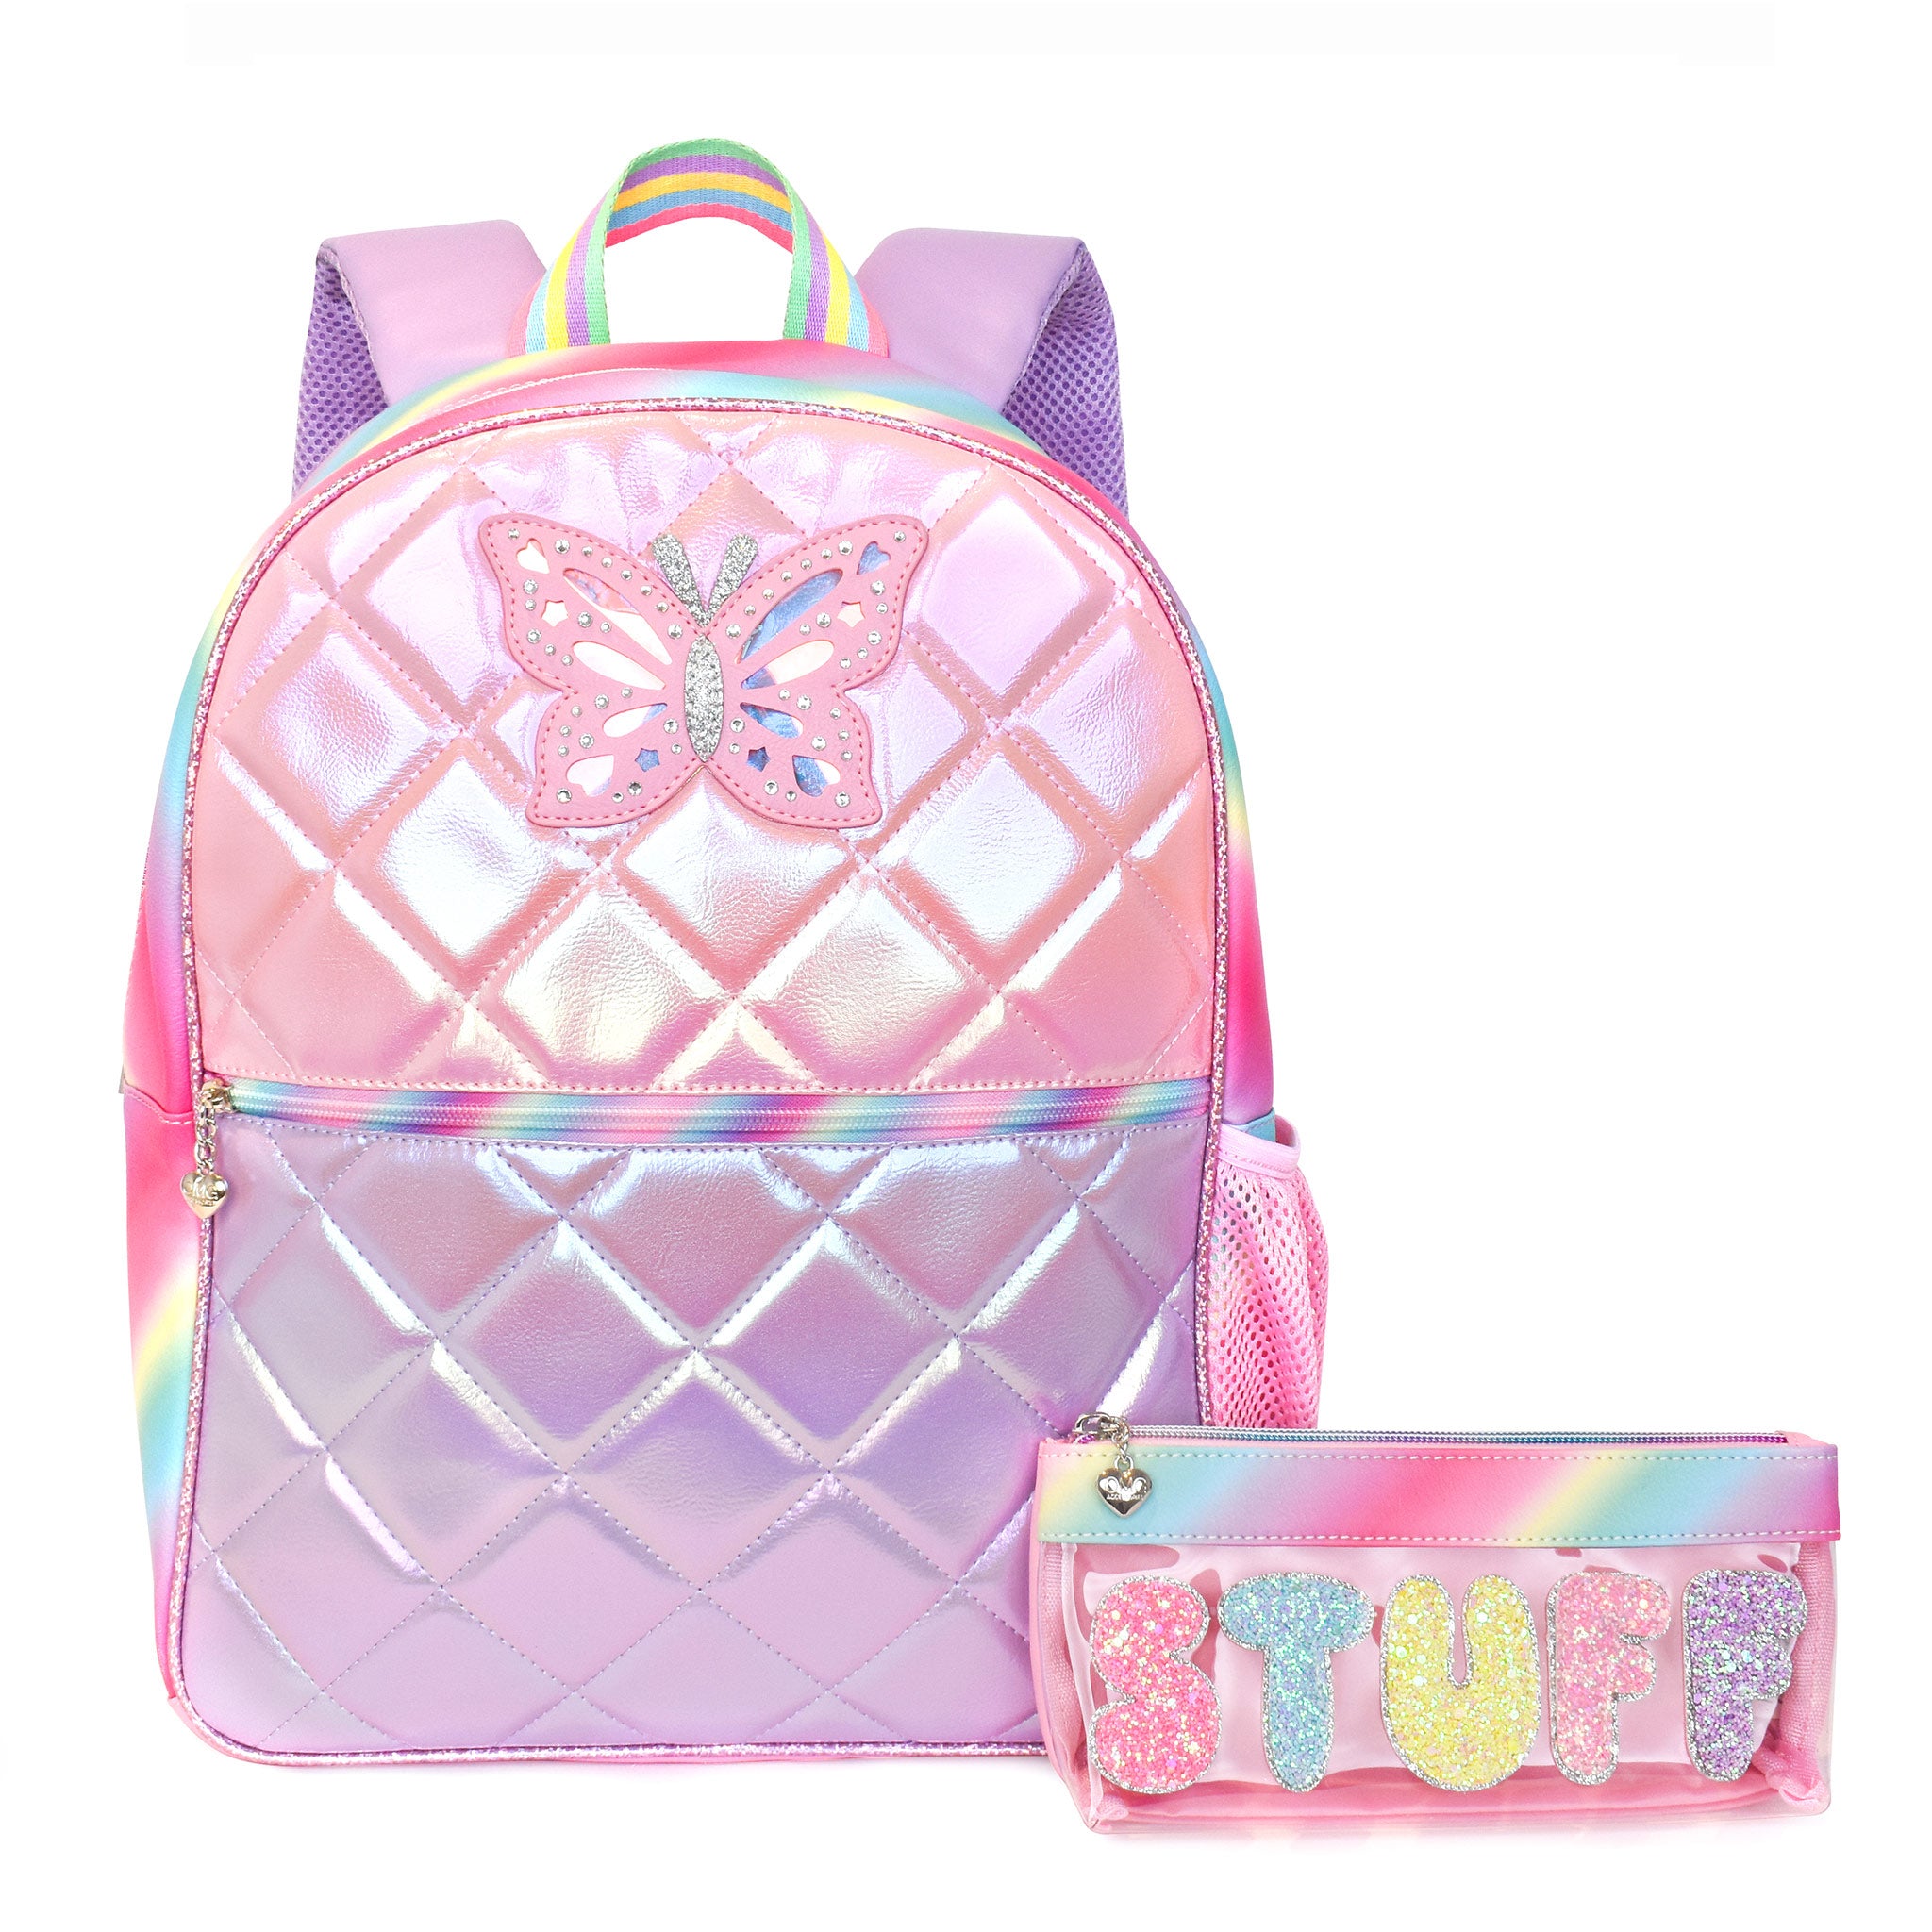 Front view of a metallic pink & purple quilted large backpack with a butterfly applique and a clear pencil pouch